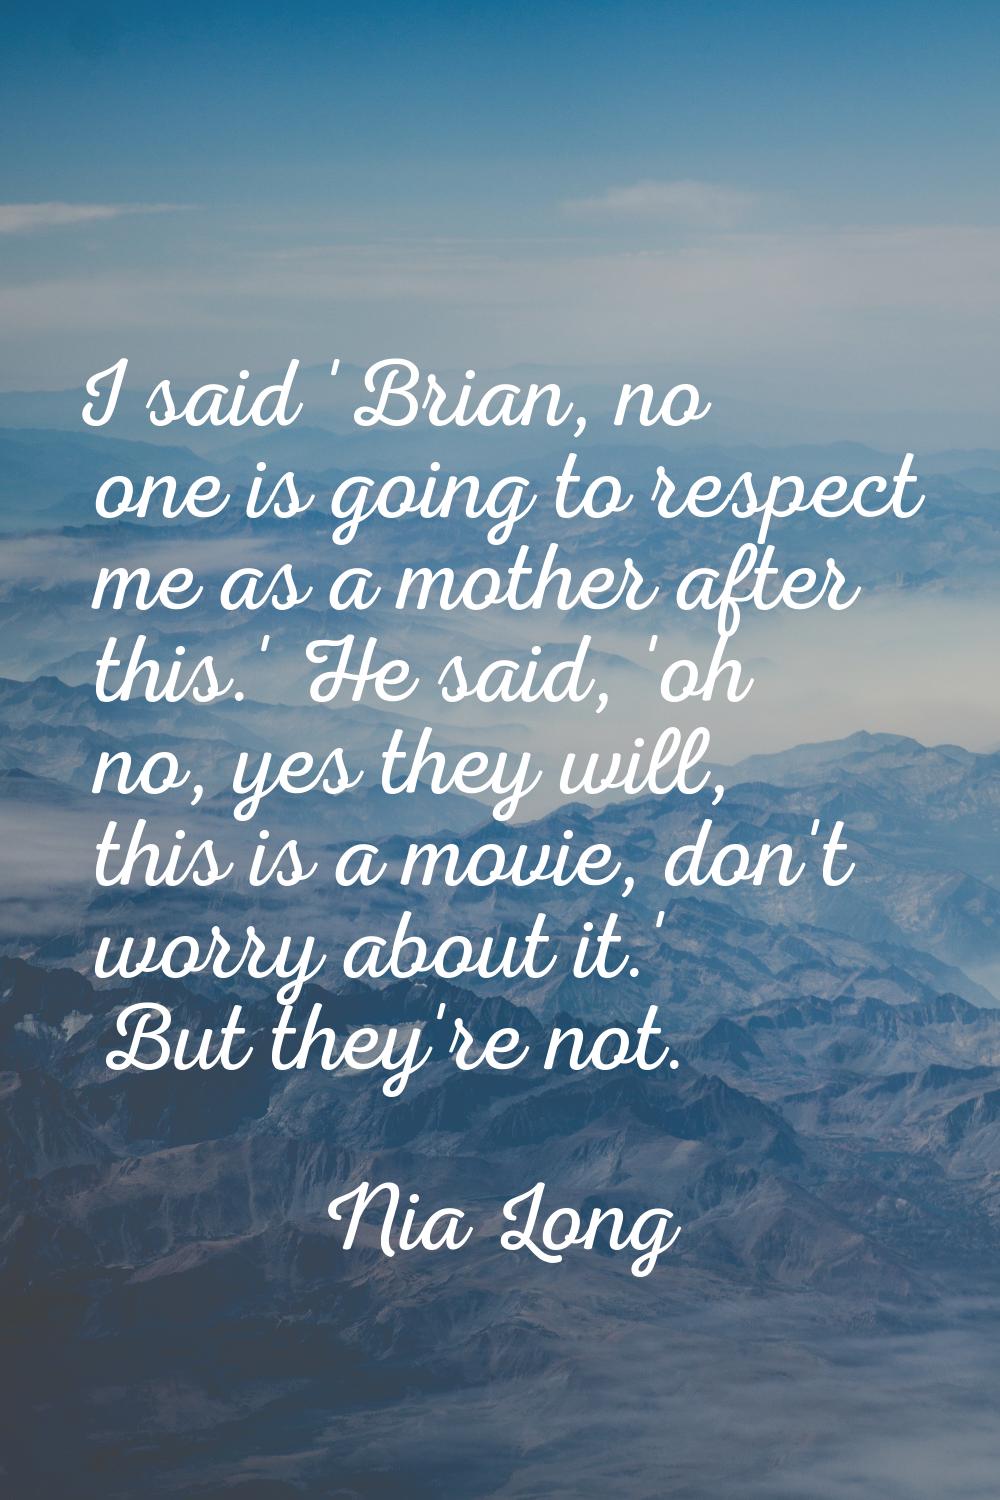 I said 'Brian, no one is going to respect me as a mother after this.' He said, 'oh no, yes they wil